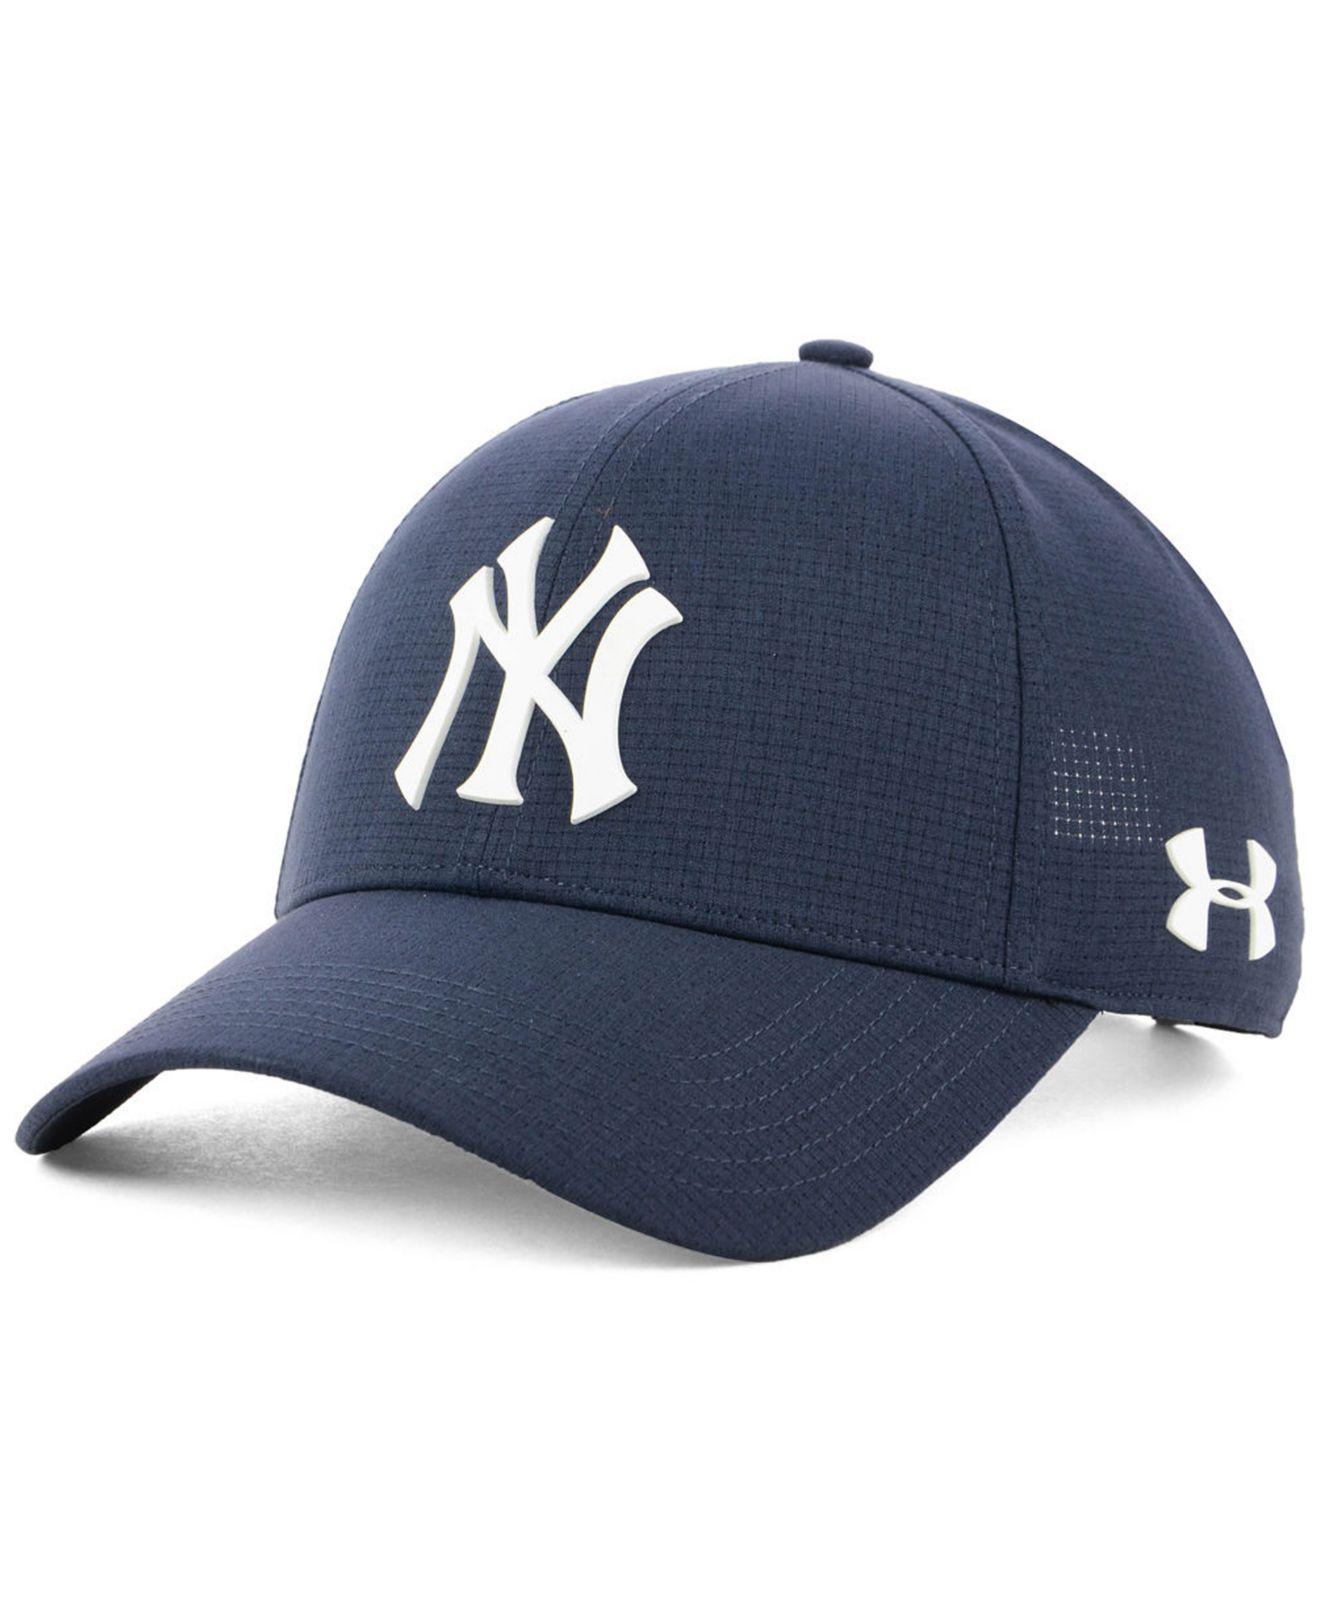 Under Armour New York Blue Lyst Cap in Yankees Men | Driver for